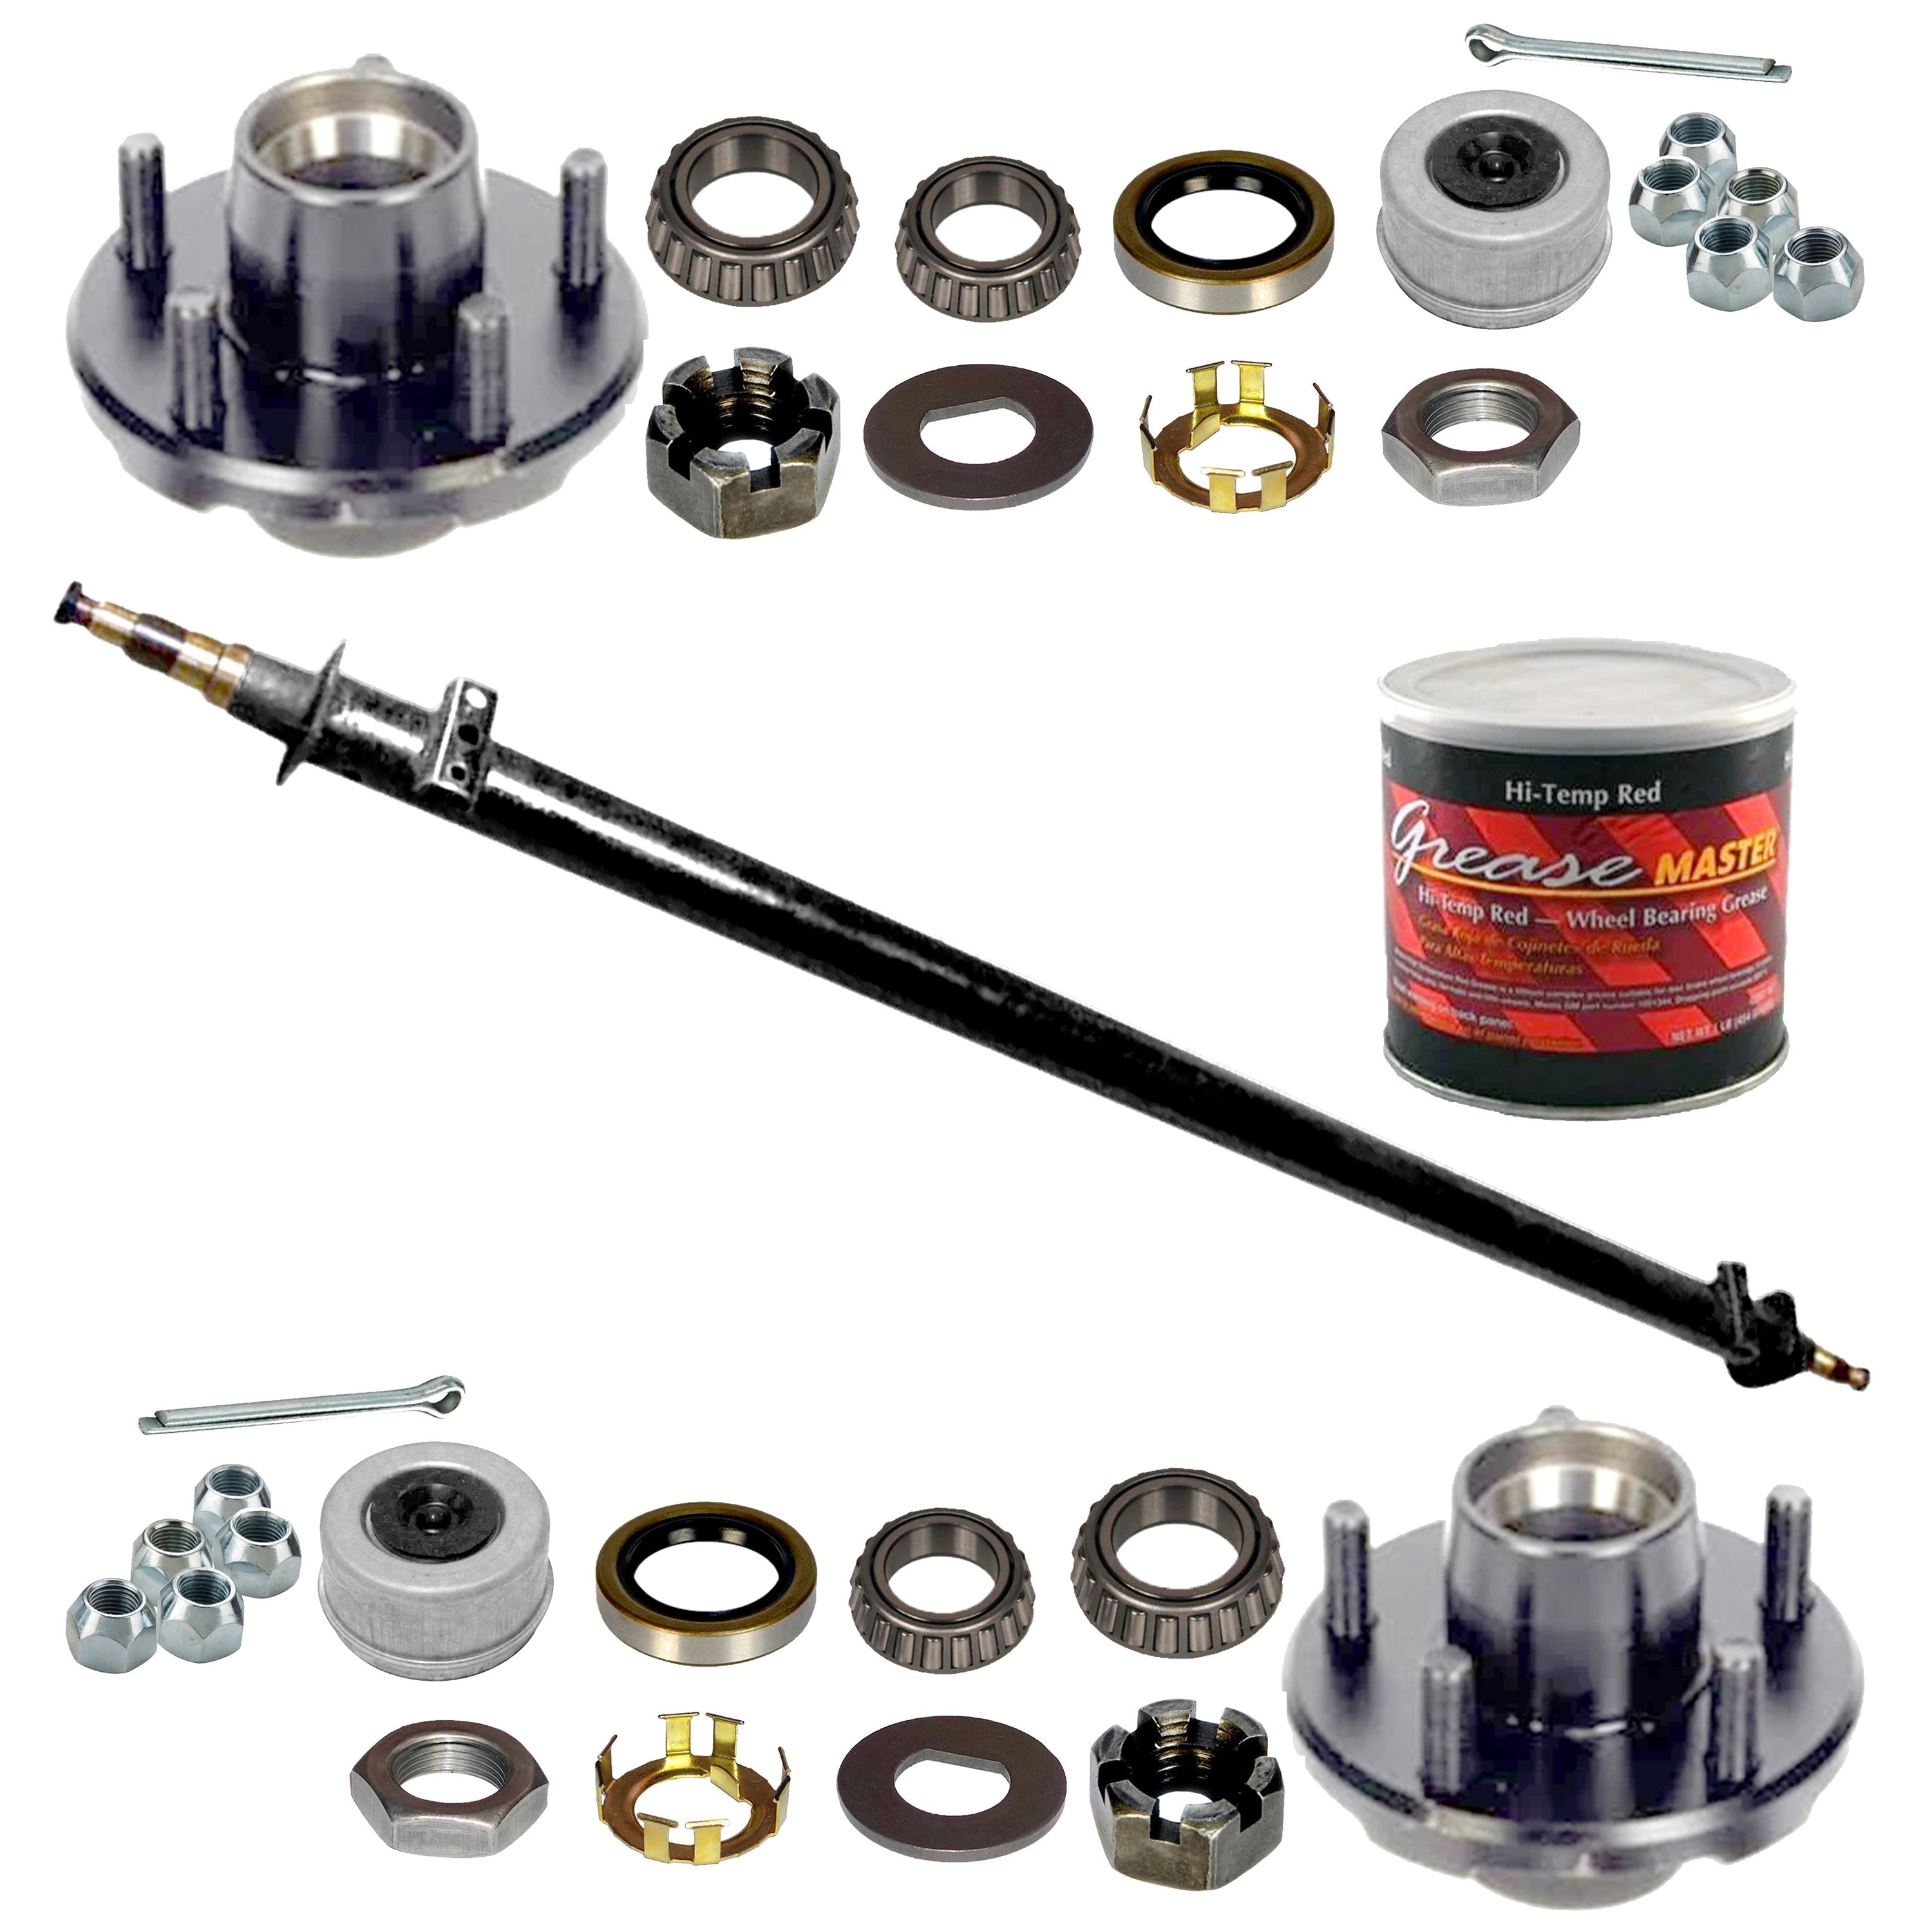 Build-Your-Own Axle Kits - Centreville Trailer Parts